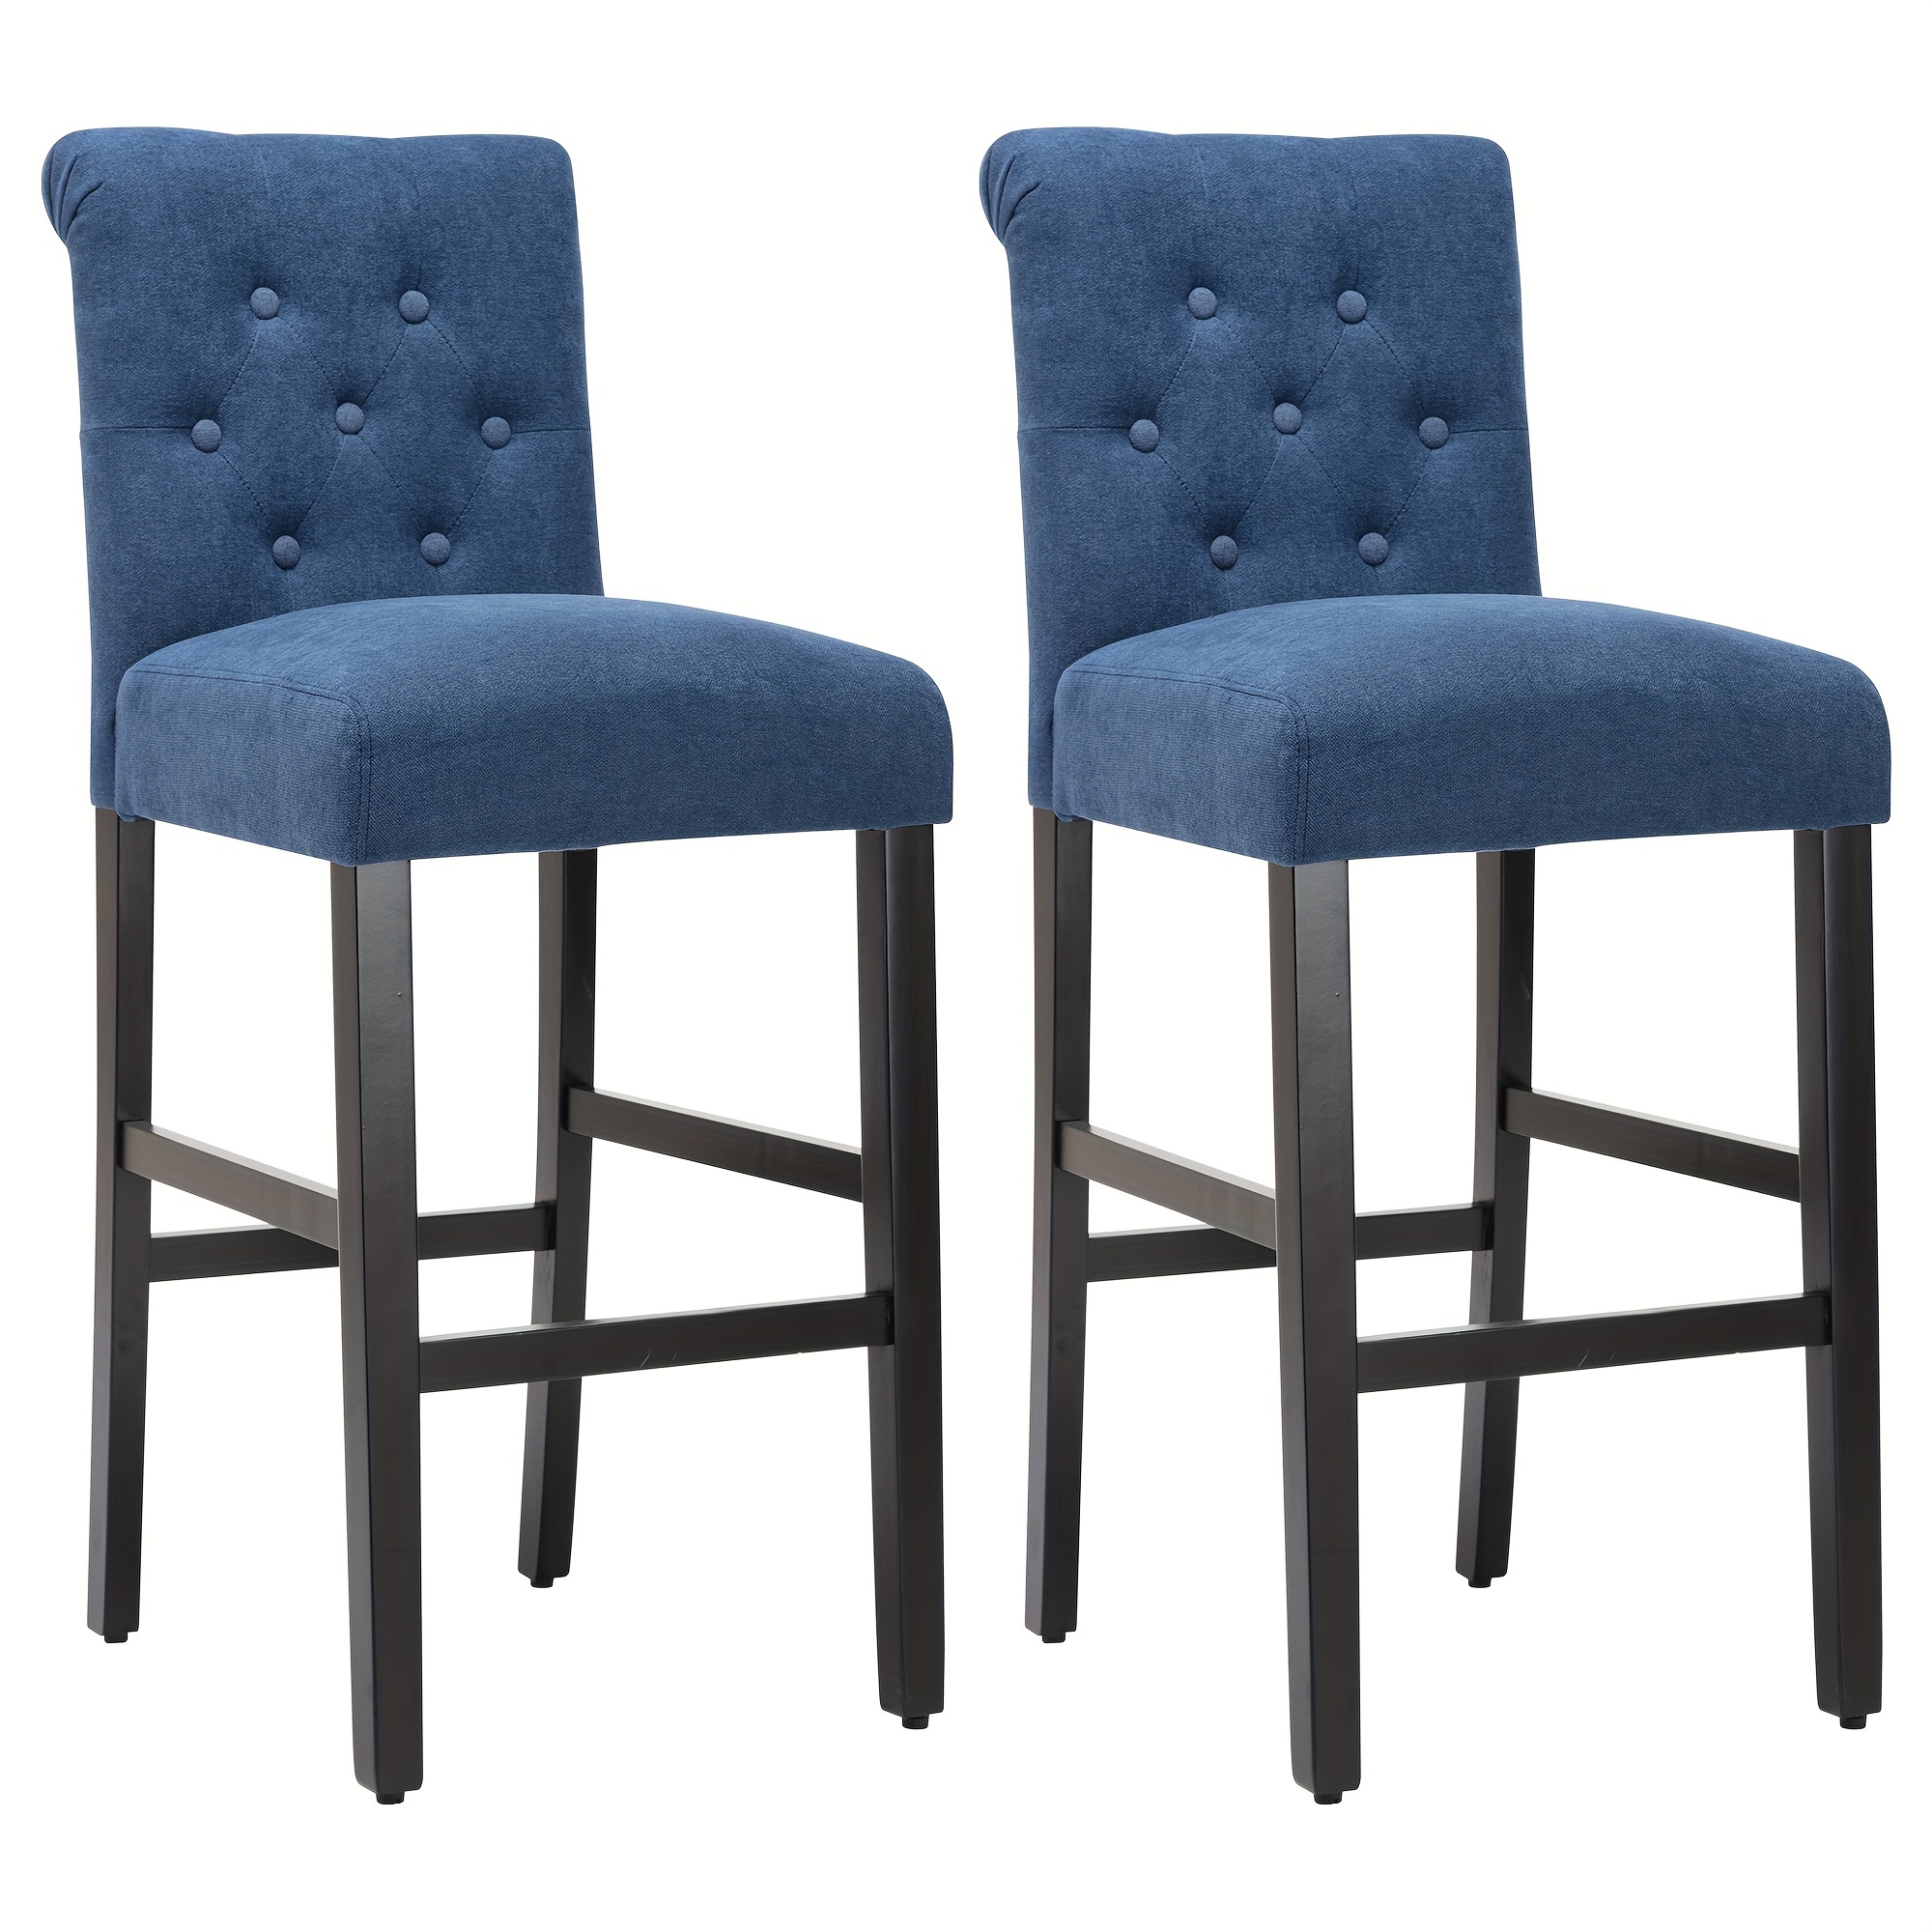 

Modern Upholstered Fabric Bar Stools Set Of 2, 29 Inches Seat Height Counter Barstools, Kitchen Bar Chairs With Button Backrest And Wood Legs, Blue